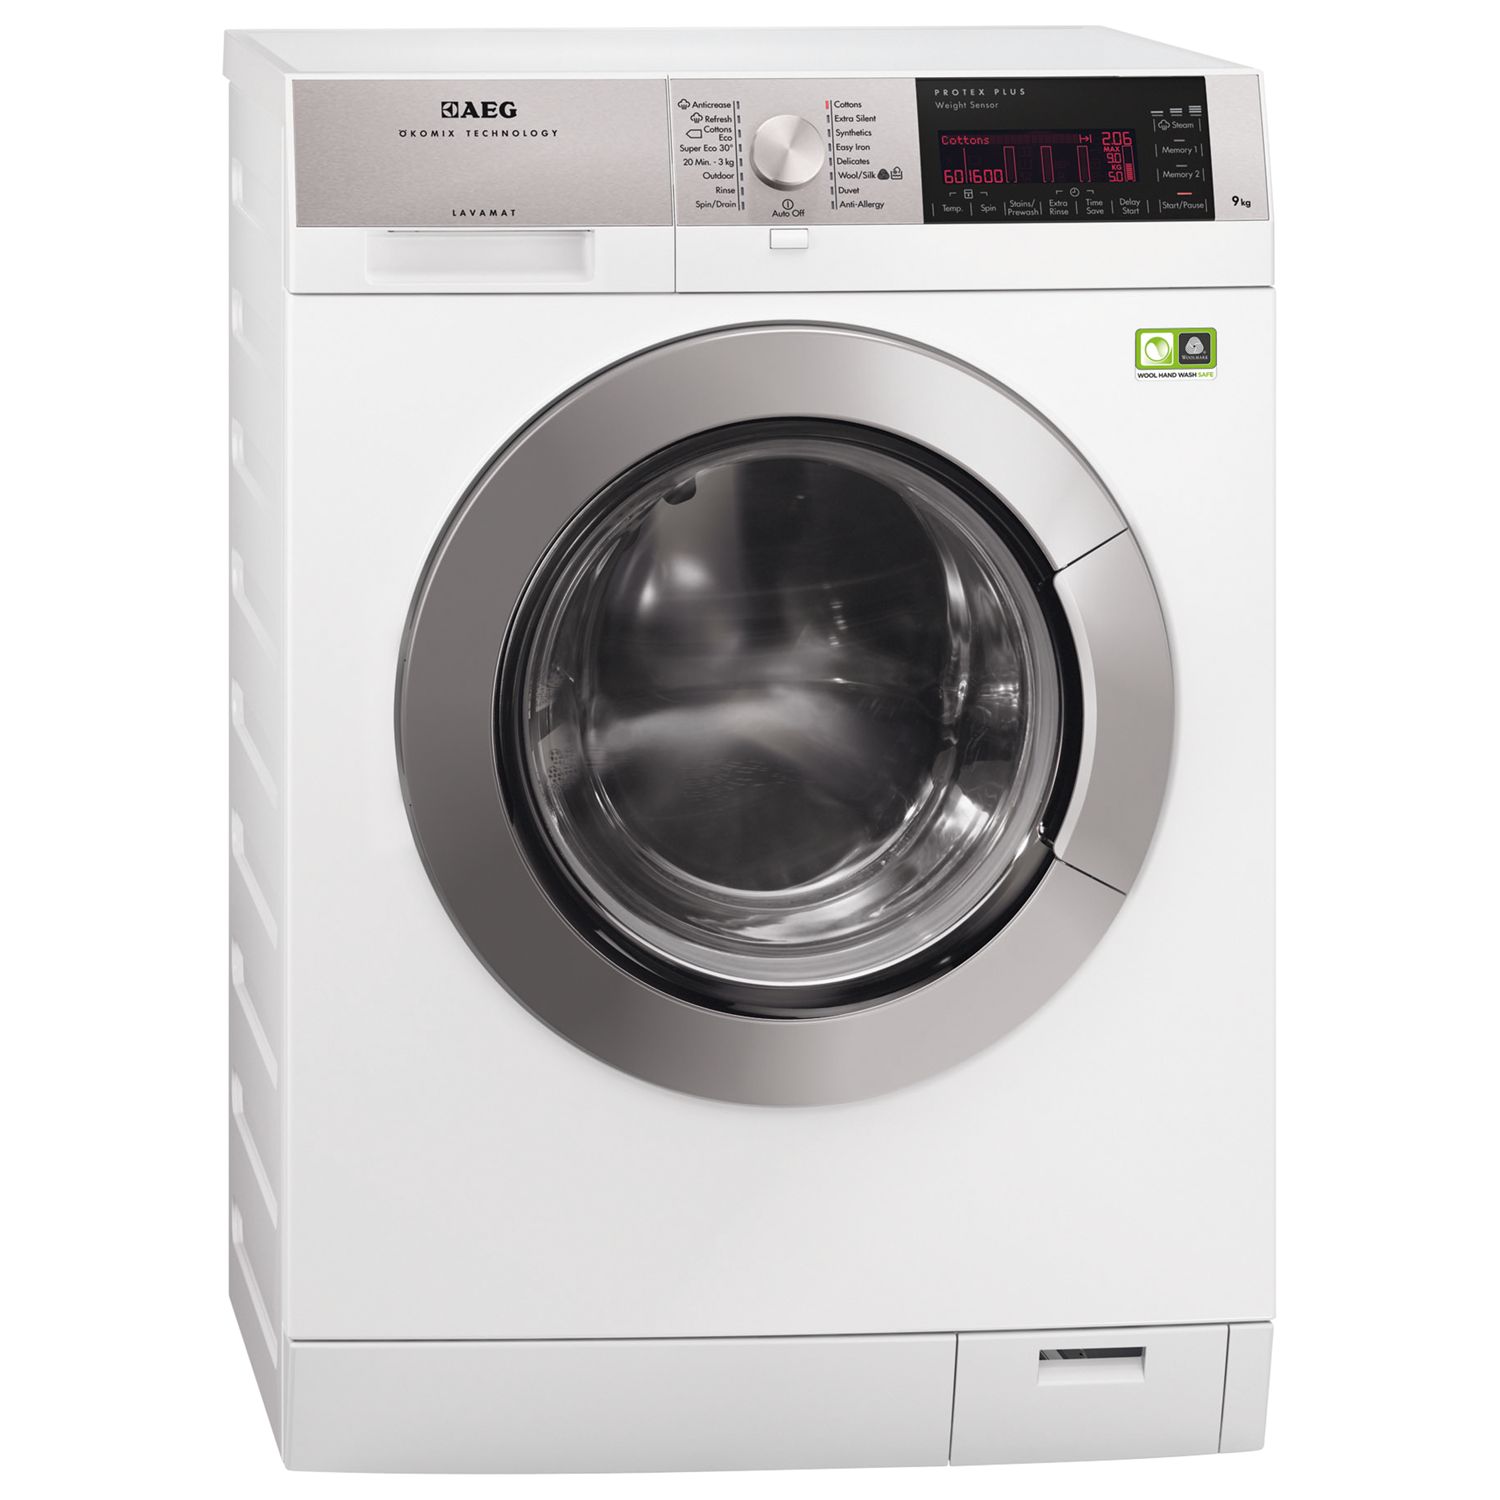 AEG L99699FL Freestanding Washing Machine, 9kg Load, A+++ Energy Rating, 1600rpm Spin in White